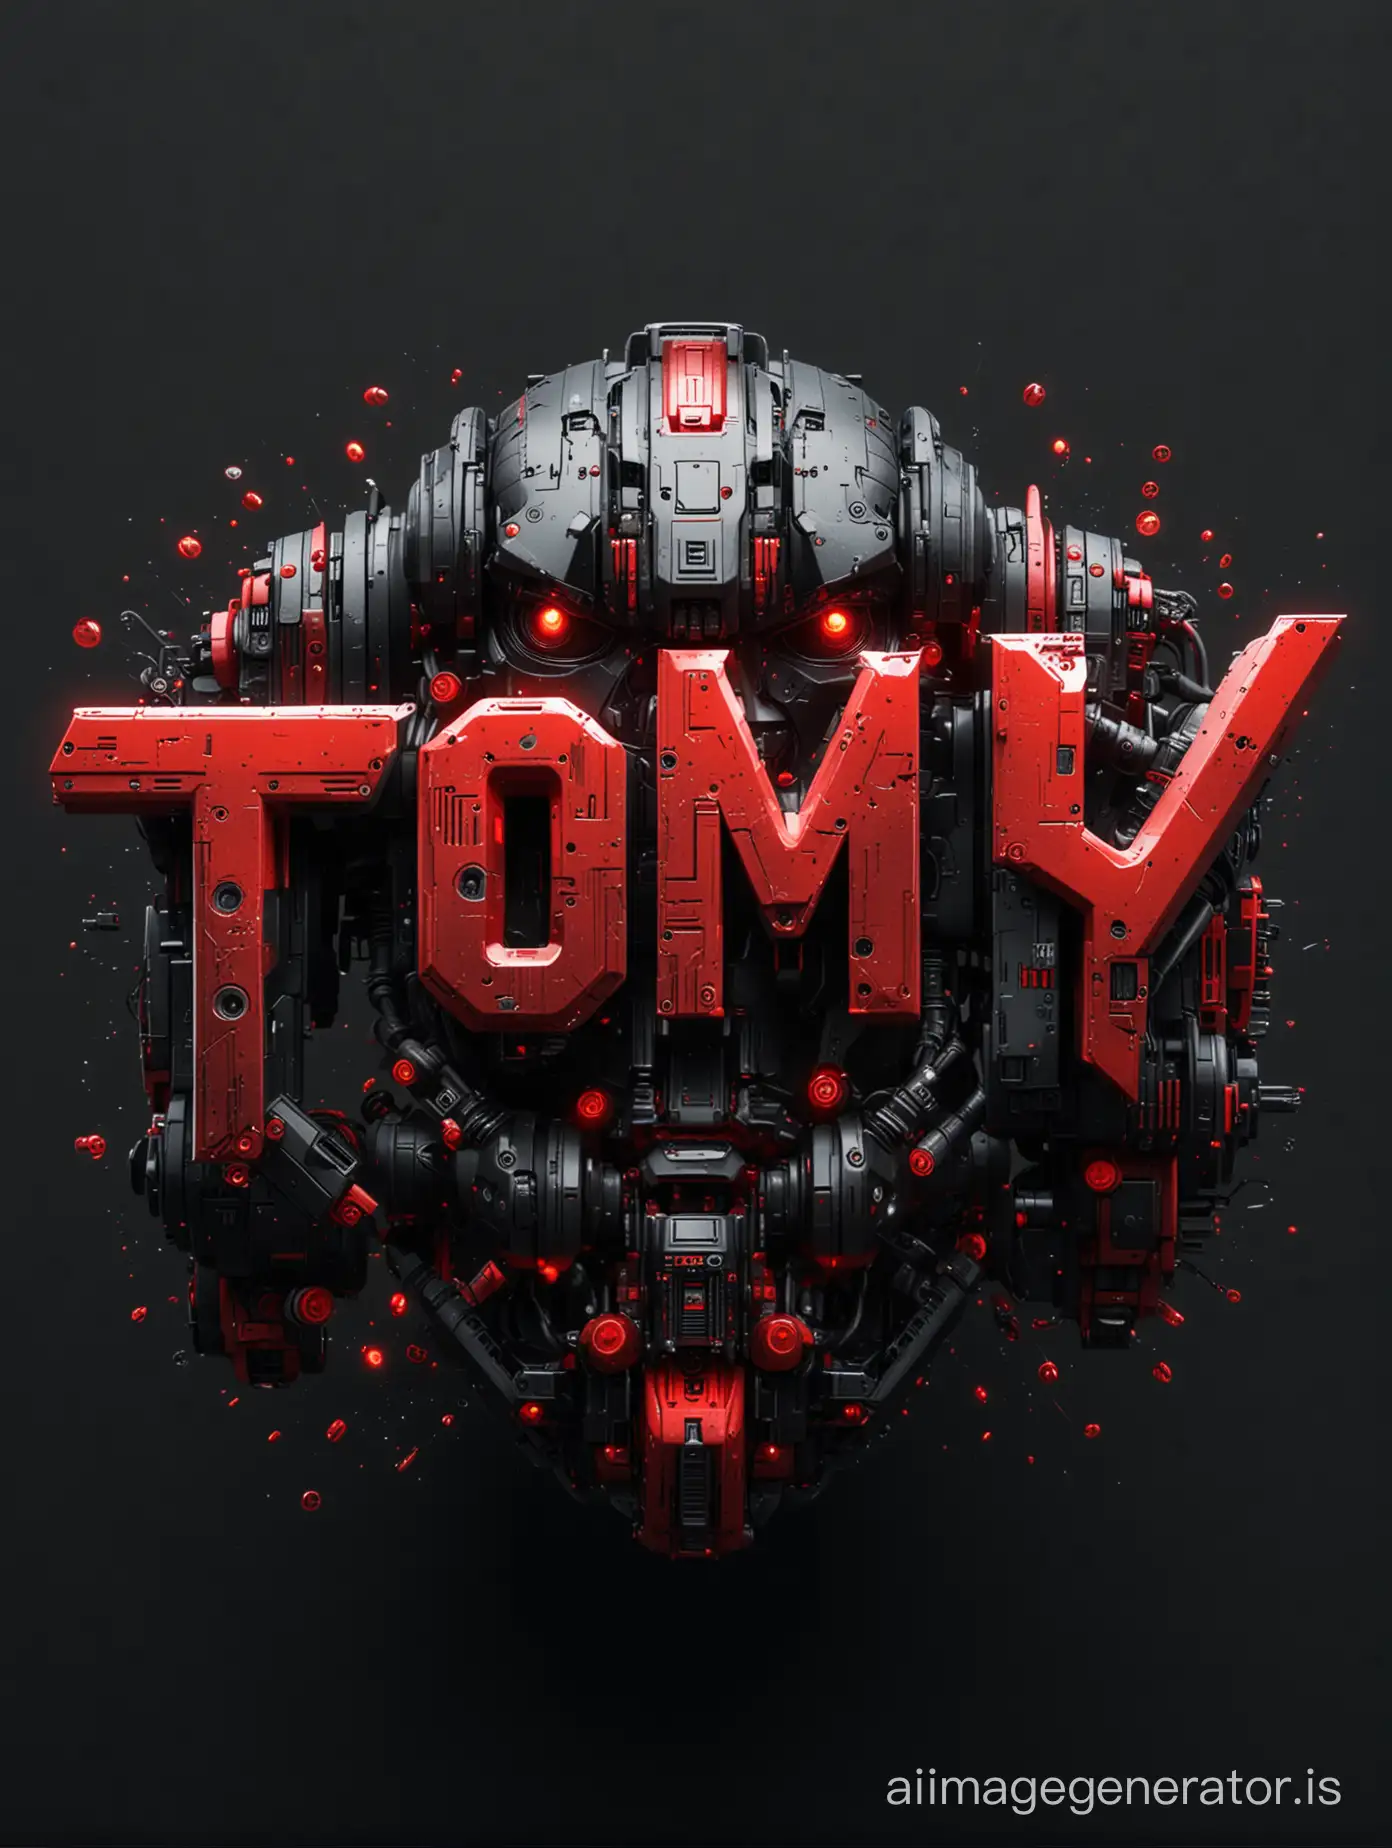 3D text "tomy" with a faced red black small cyberpunk mecha robot font on it with details, a few small particles, and a black background